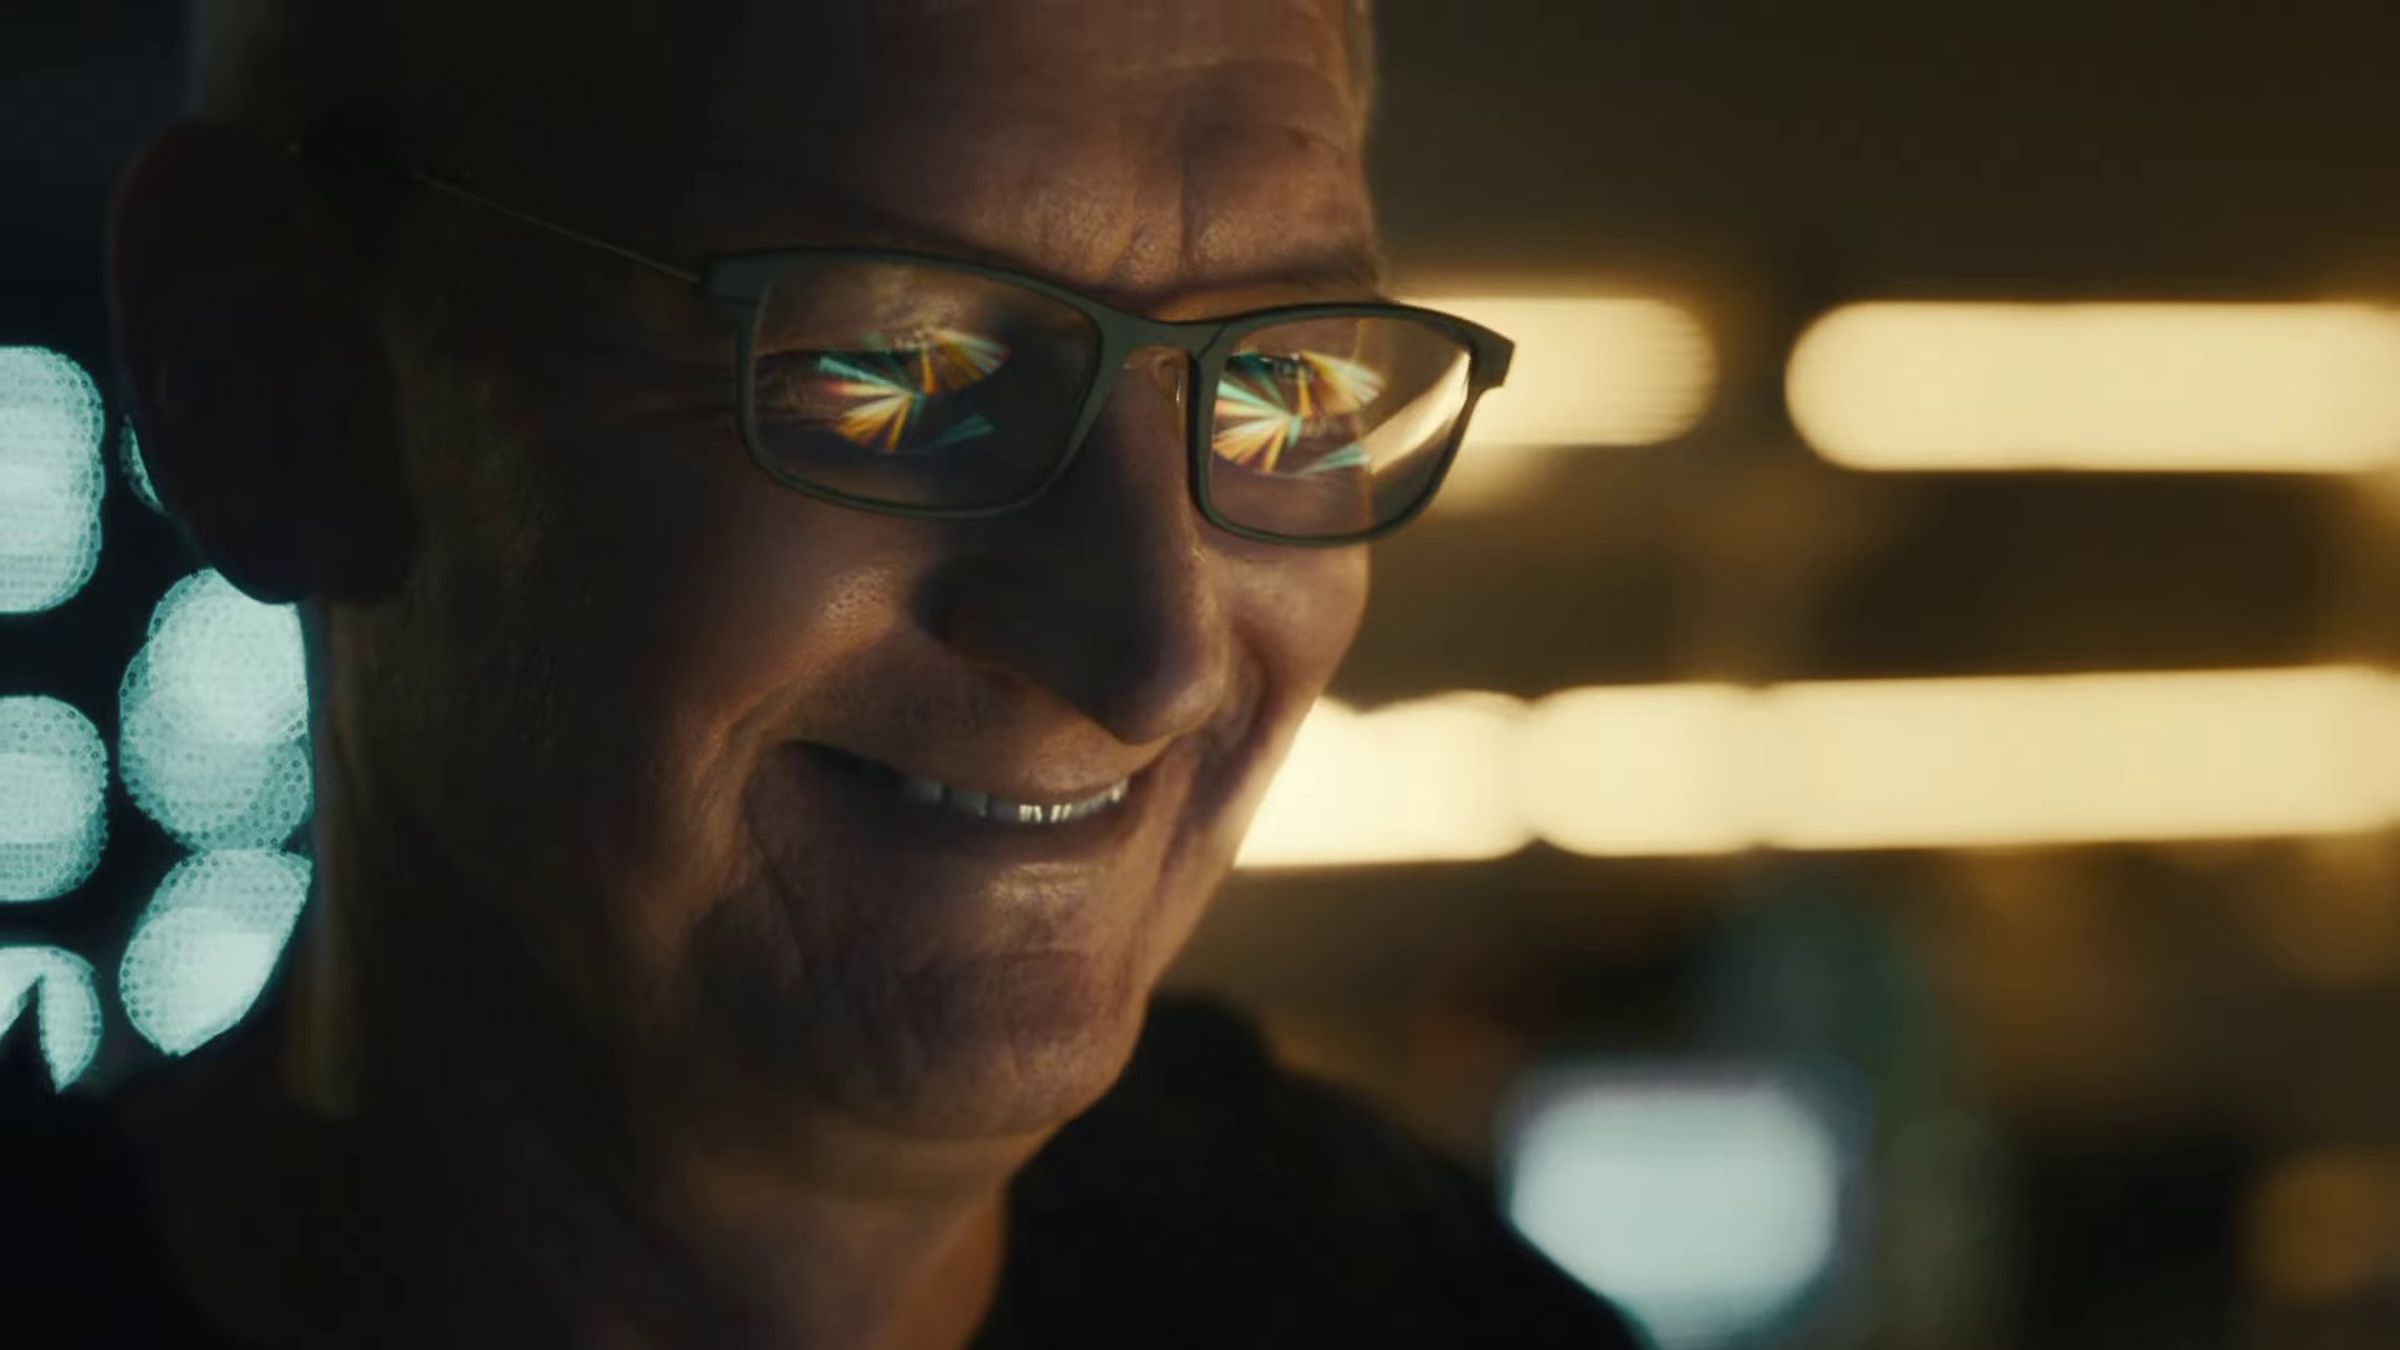 Tim Cook smiles in a Mission: Impossible-esque marketing video where he infiltrates Apple to plant an M1 chip in the iPad.